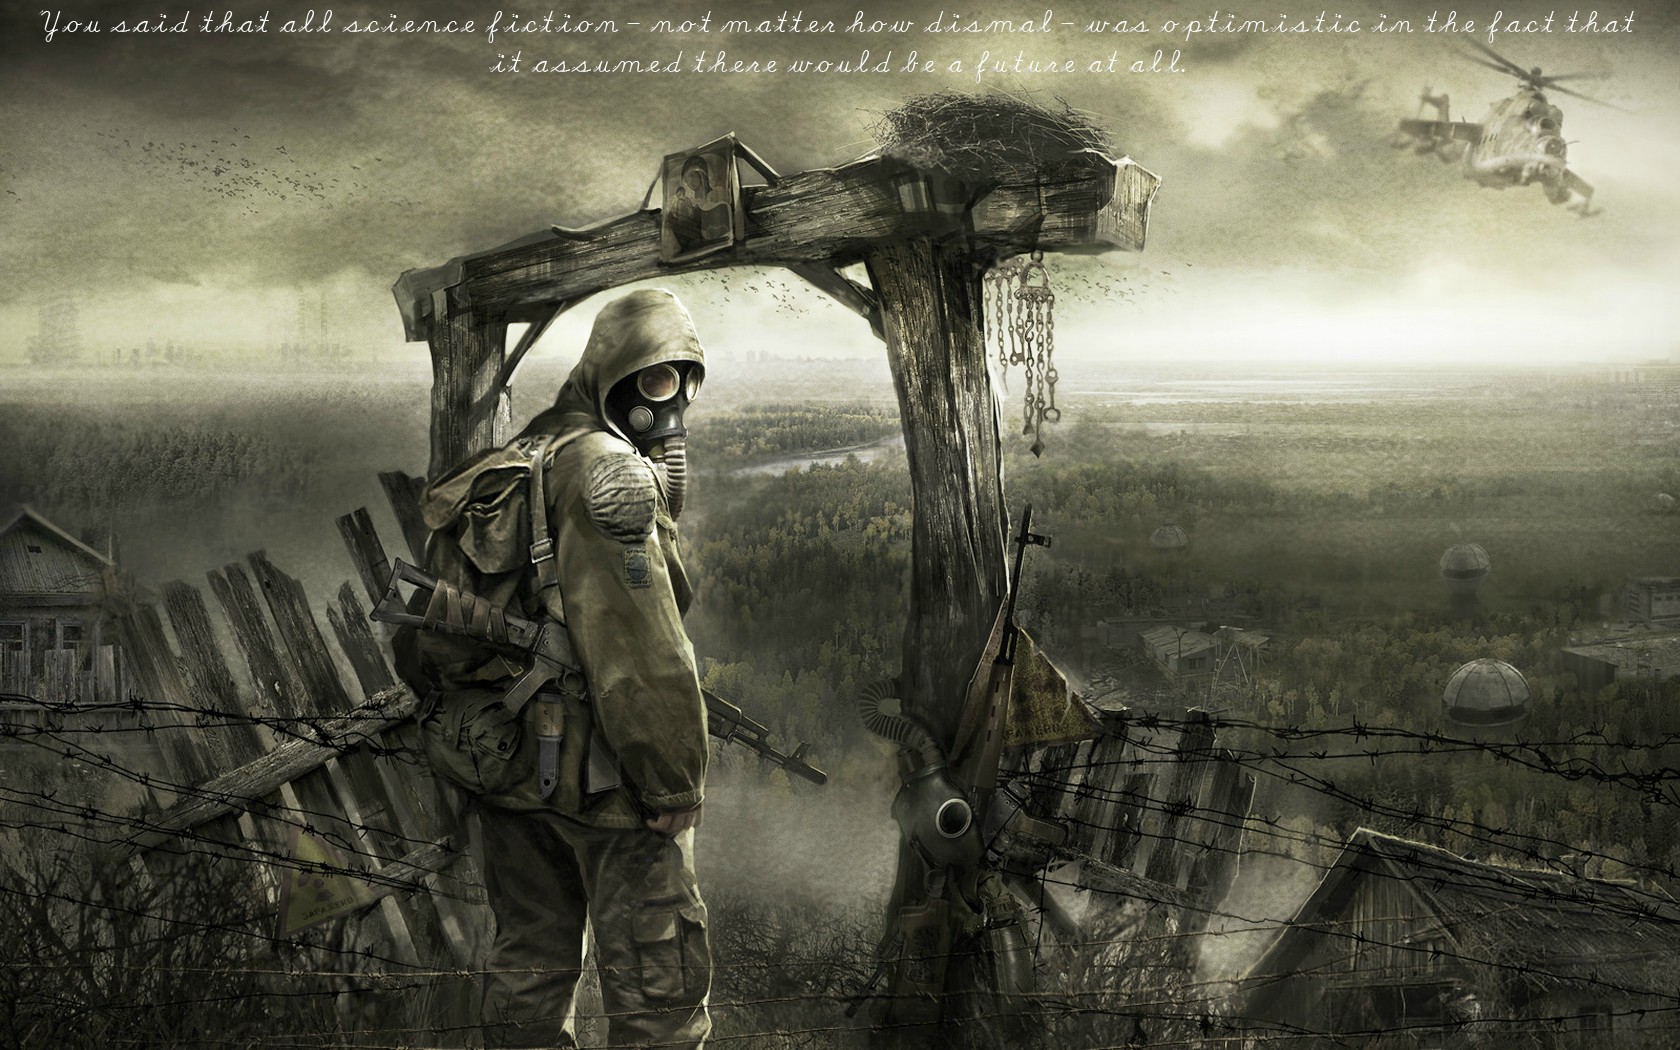 S.T.A.L.K.E.R.: Shadow of Chernobyl Wallpapers